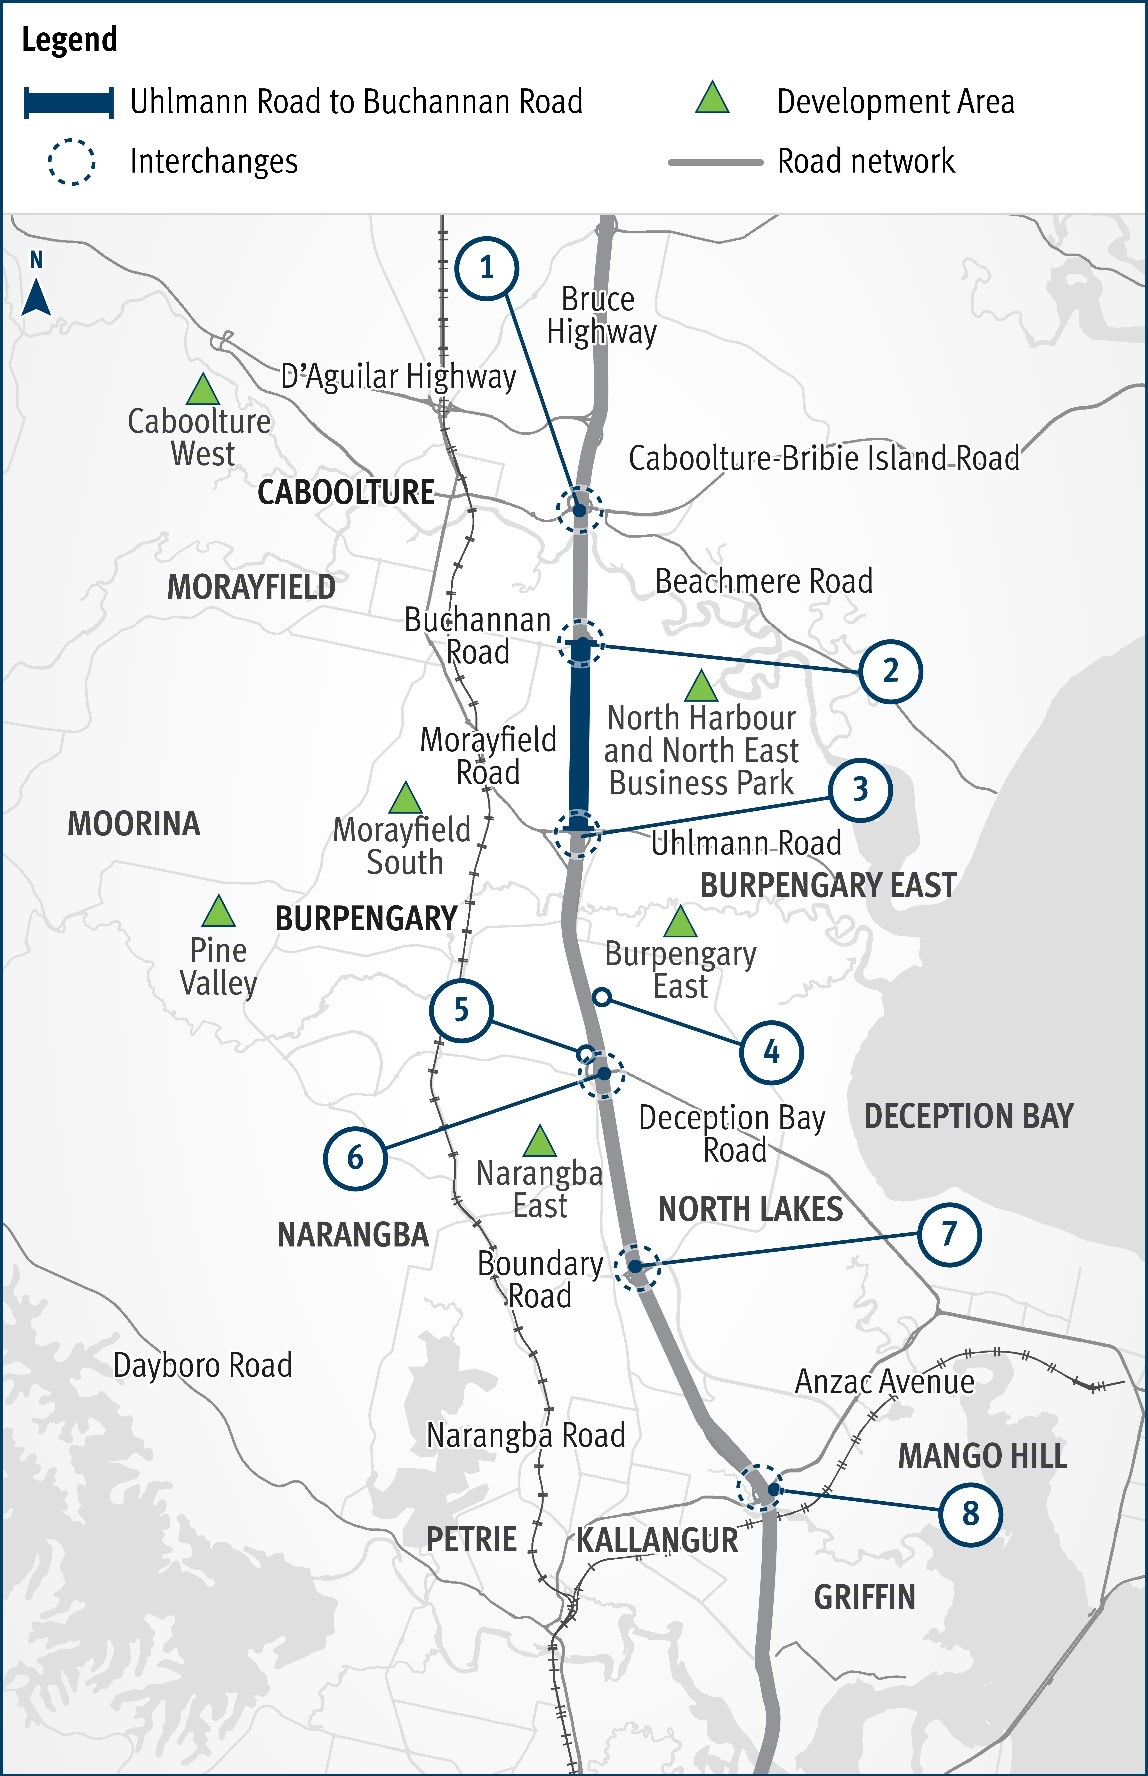 Bruce Highway (Brisbane - Gympie), Uhlmann Road to Buchanan Road upgrade project map